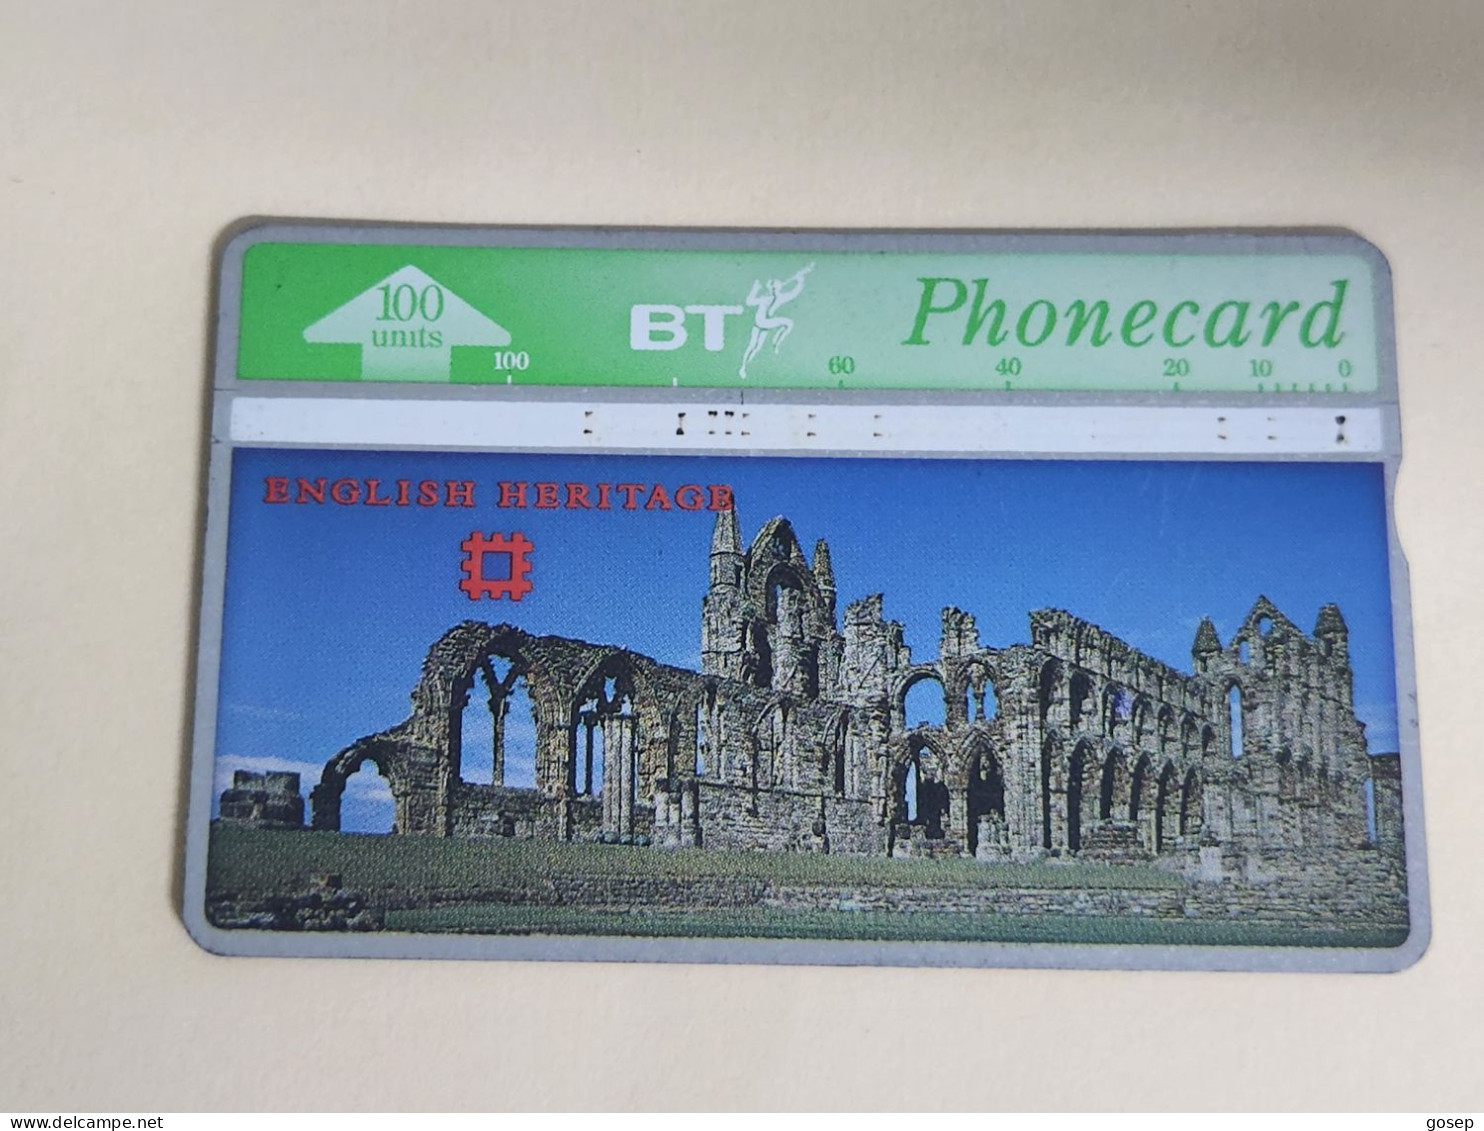 United Kingdom-(BTA122)-HERITAGE-Whitby Abbey-(216)(100units)(527H57509)price Cataloge3.00£-used+1card Prepiad Free - BT Emissions Publicitaires